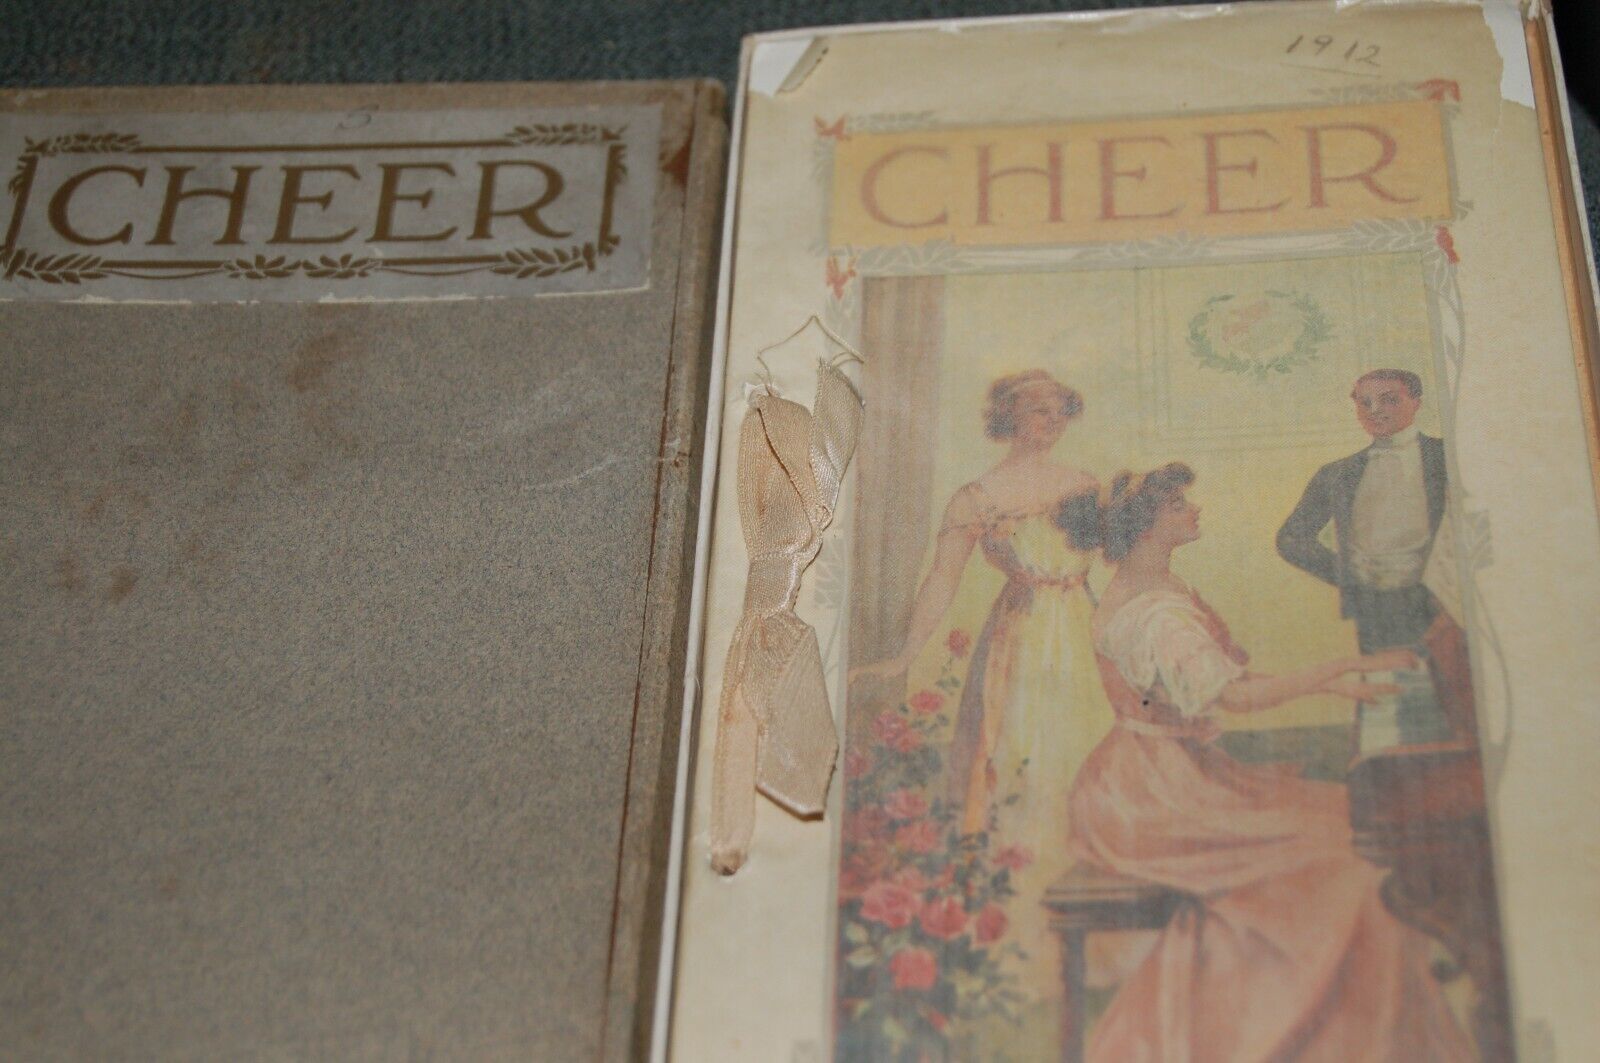 Primary image for Cheer A Book of Poems by Wallace & Frances Rice,Reilly Britton, 1912, scarce box